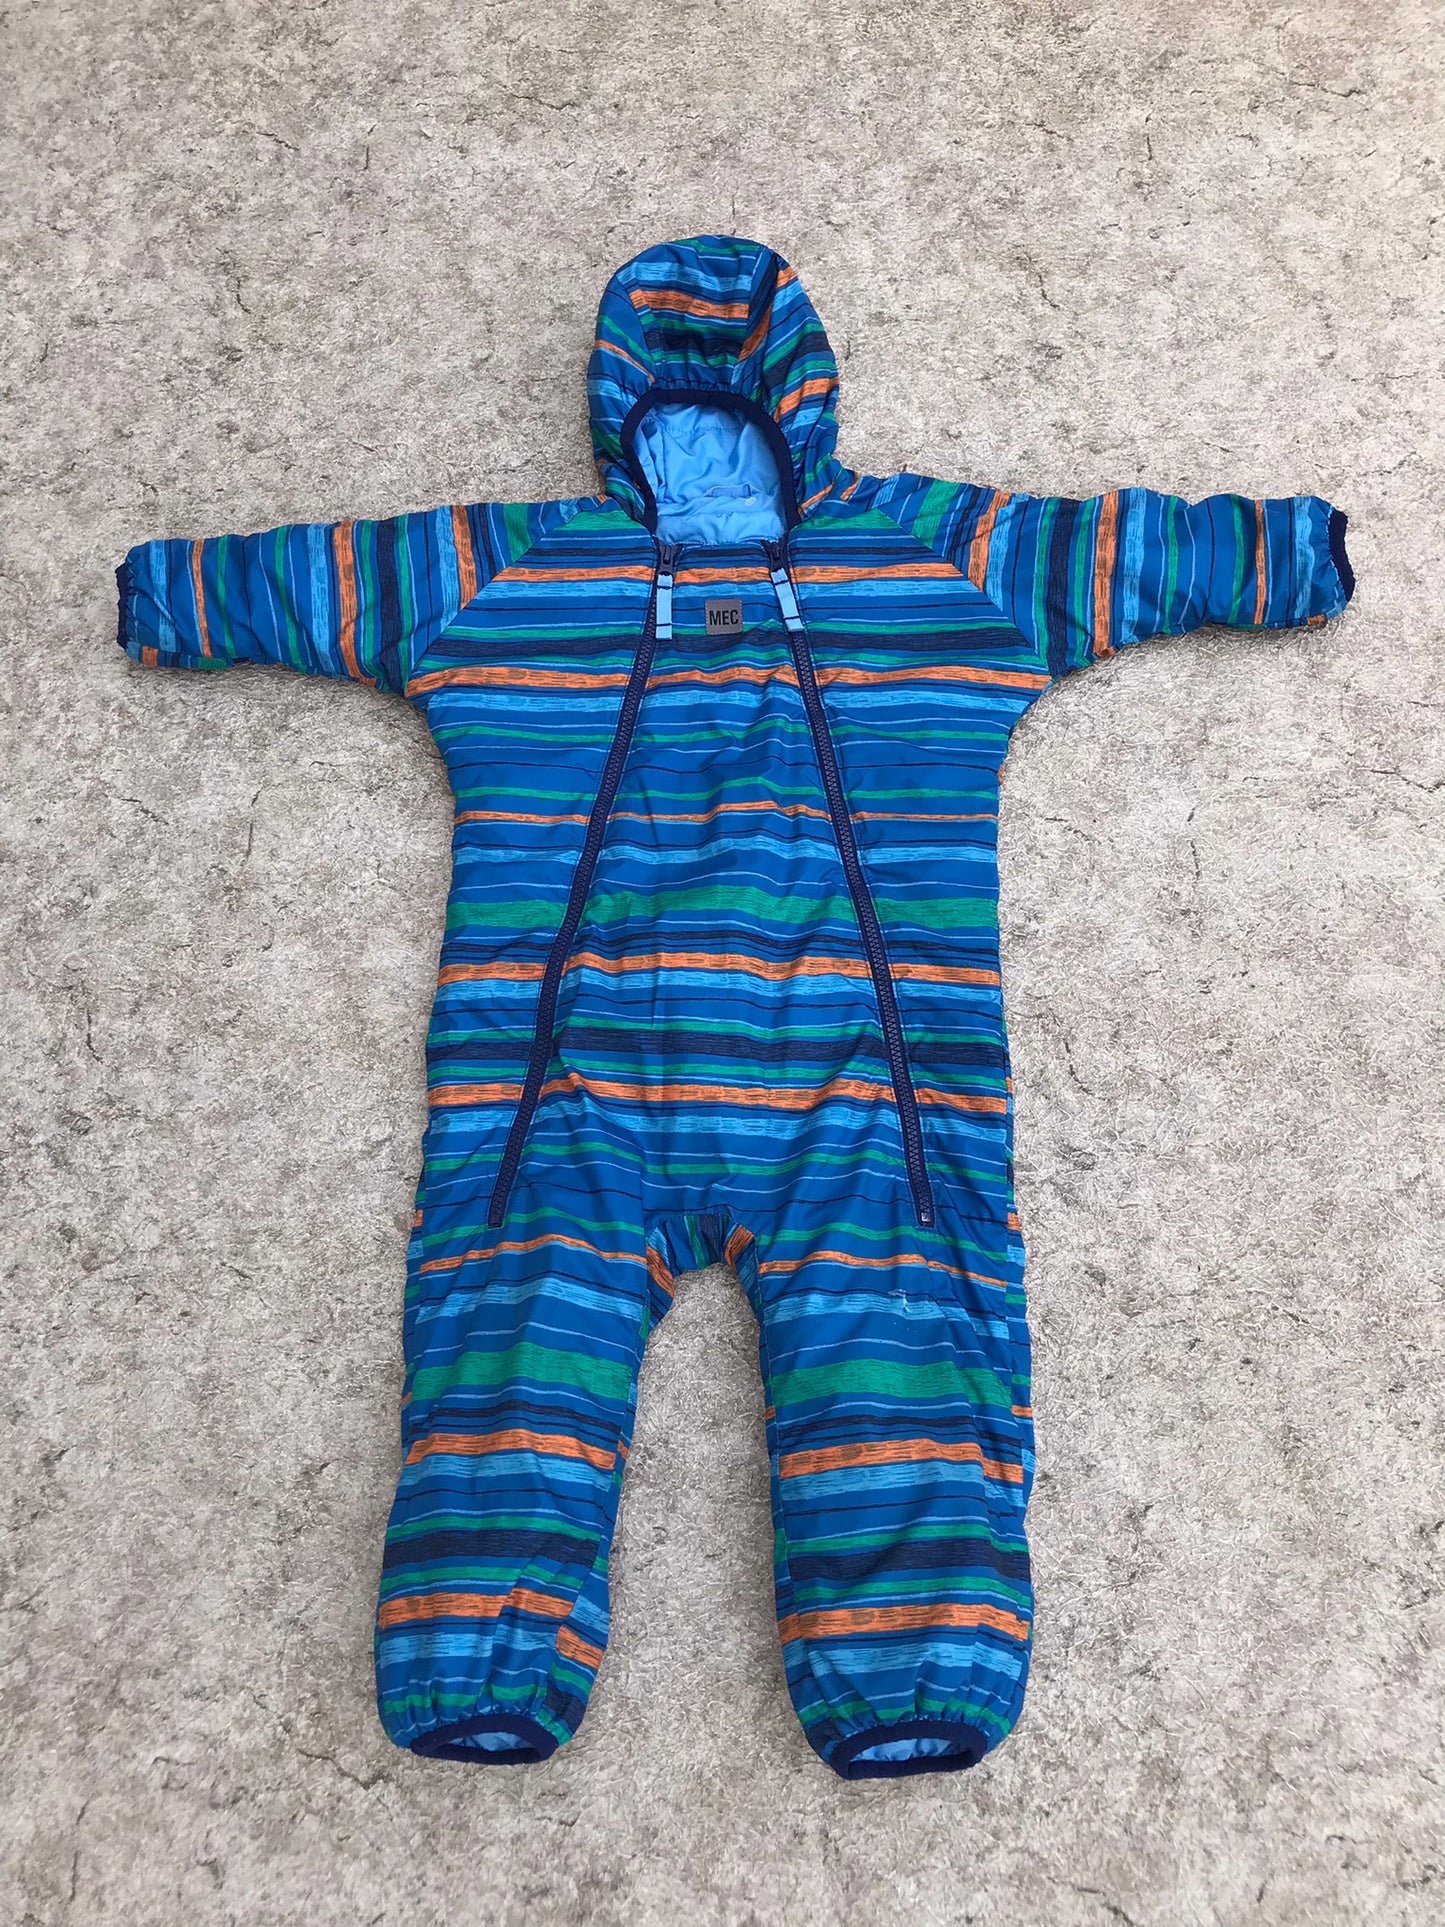 Snowsuit Child Size 18 Month MEC Blue Multi With Hand And Feet Mitts Open or Covered Small Tear On Leg